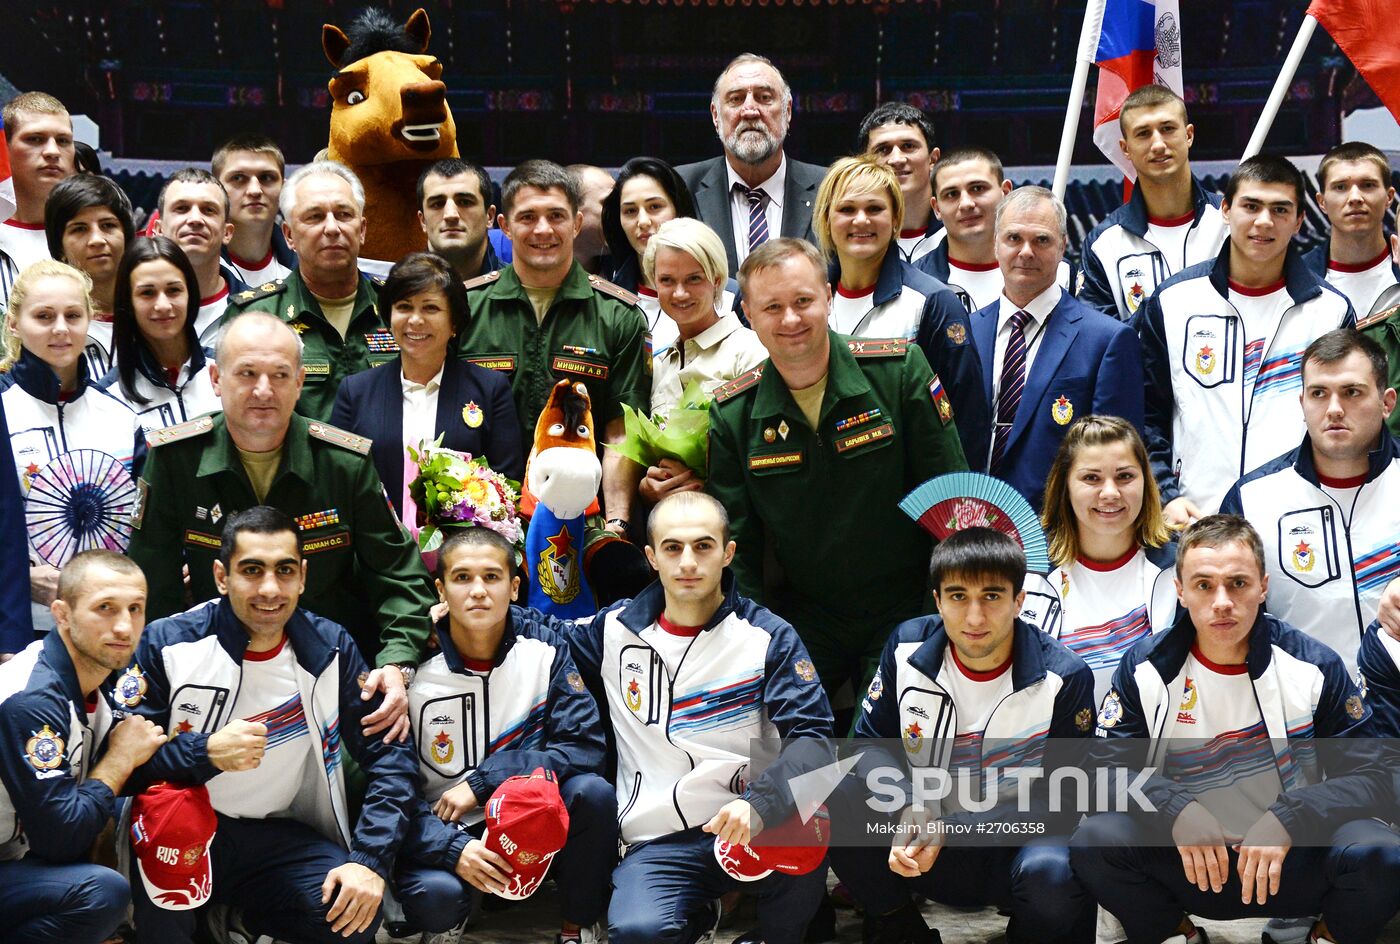 Farewell ceremony for Russian Armed Forces team leaving for the 6th Military World Games